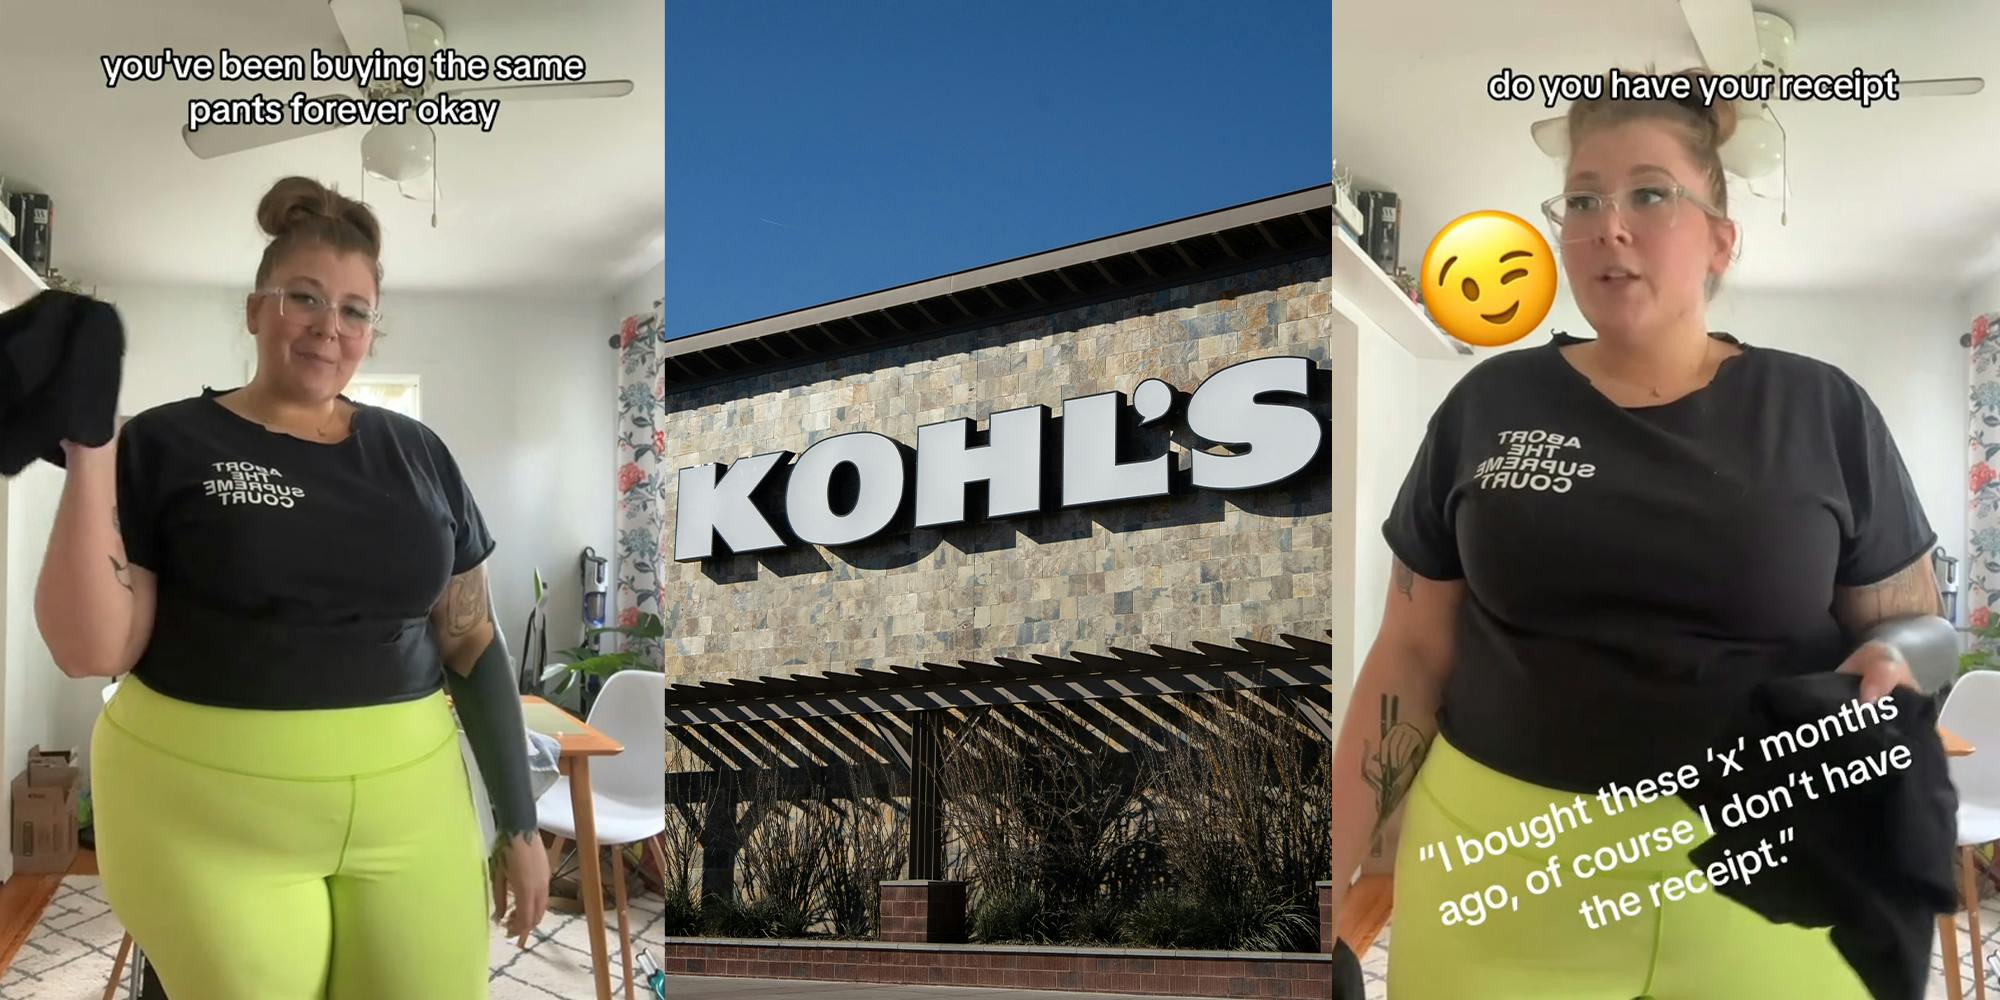 We tried making  returns at Kohl's (yes, Kohl's) and here's how it  works.